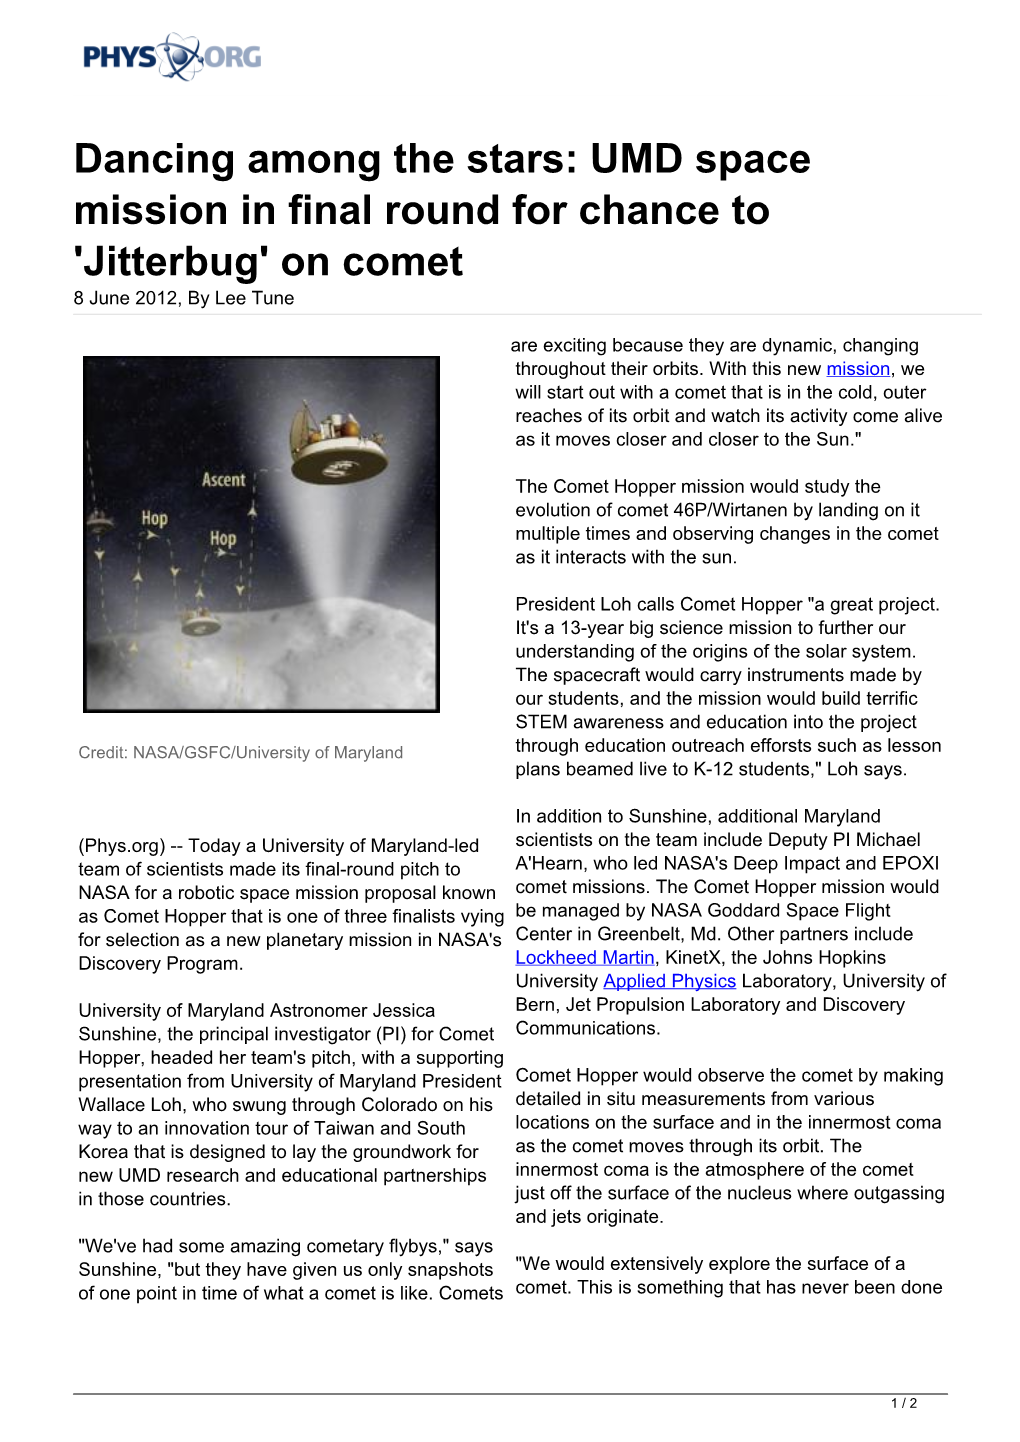 Dancing Among the Stars: UMD Space Mission in Final Round for Chance to 'Jitterbug' on Comet 8 June 2012, by Lee Tune